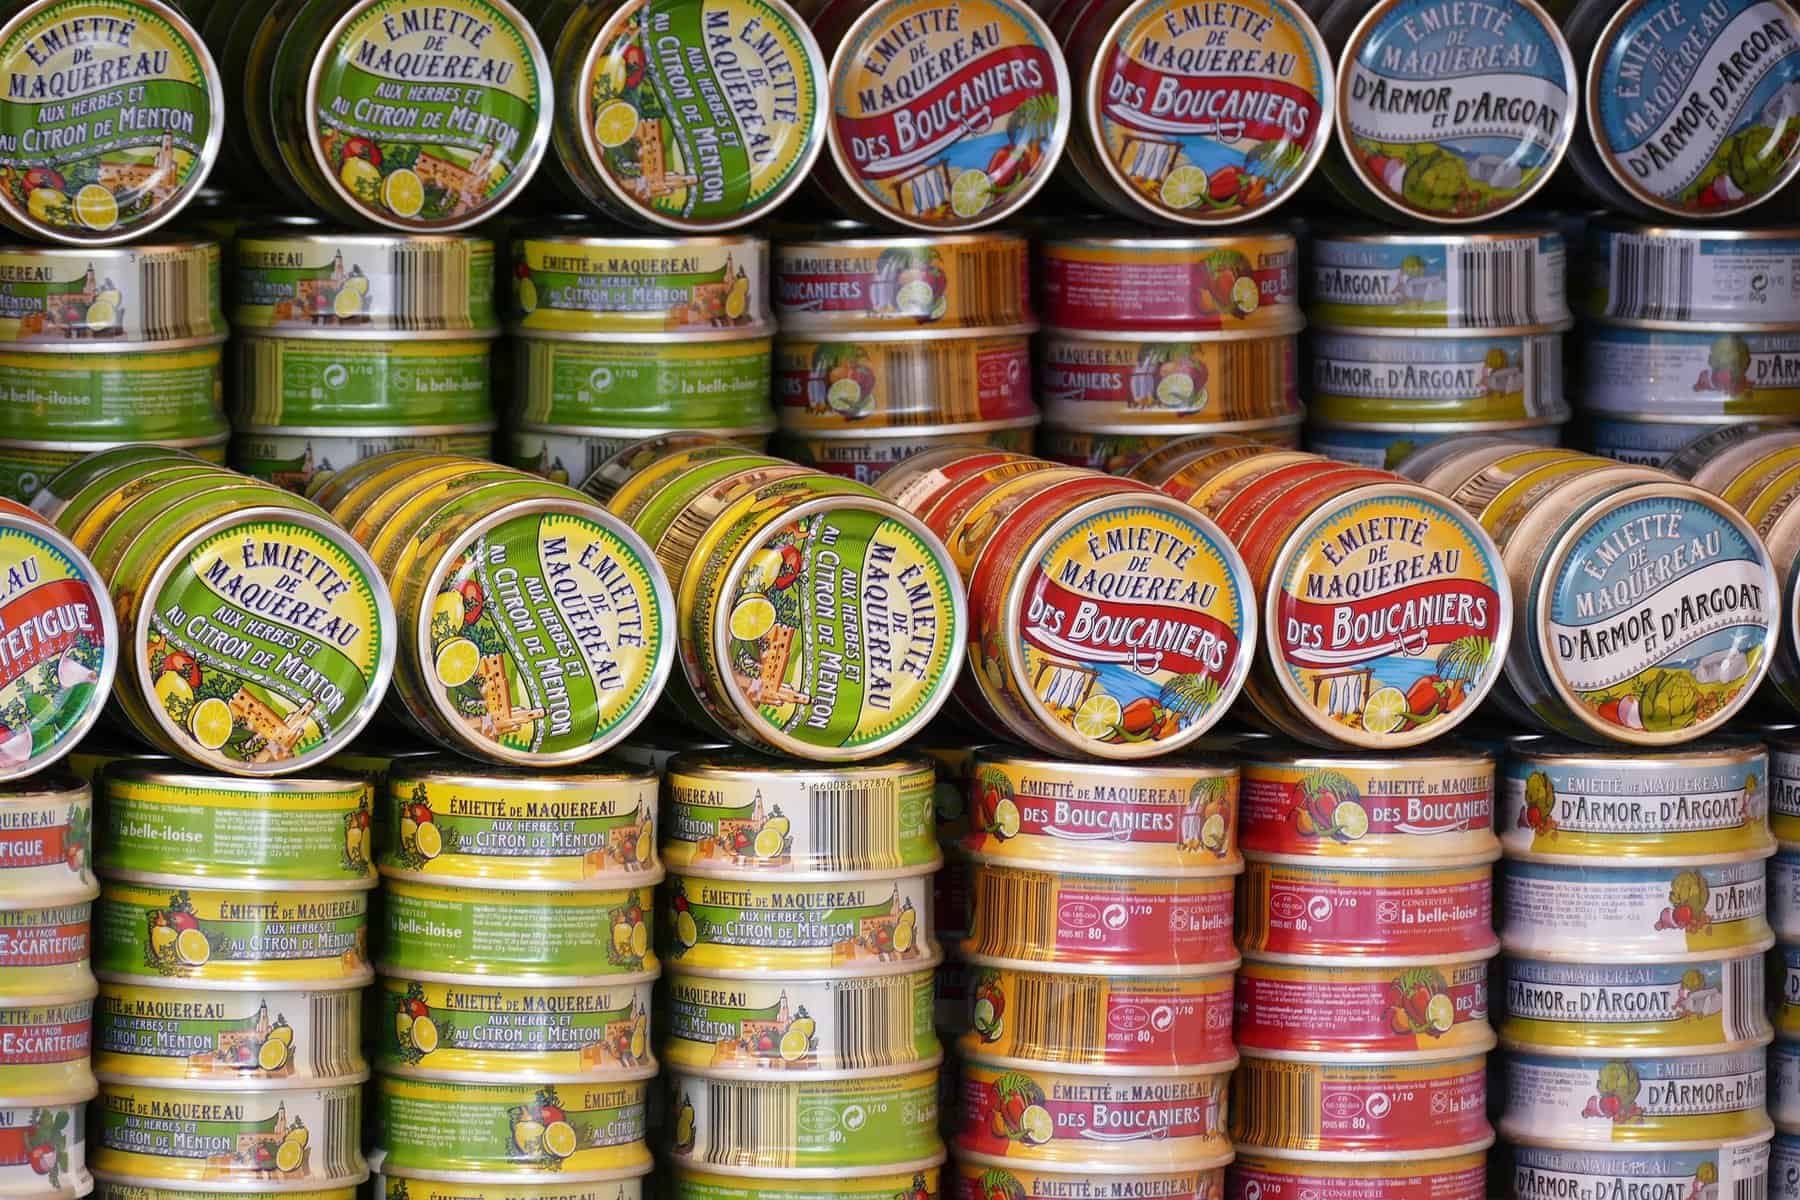 Stacks of colorful canned foods are shown.